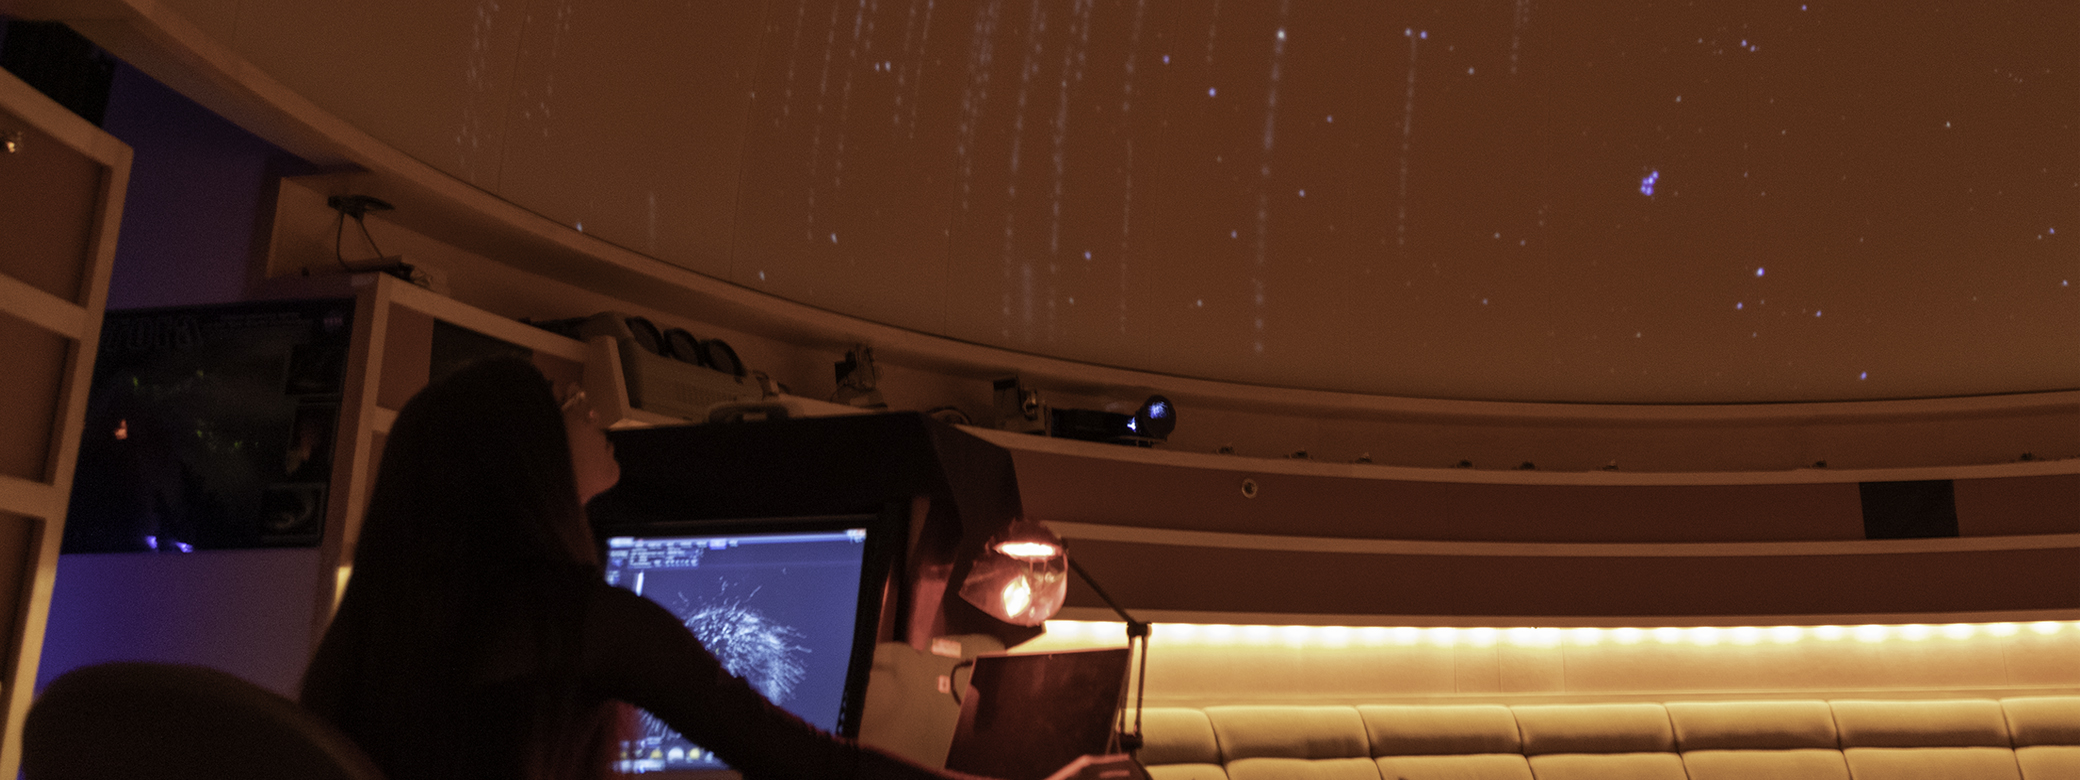 A student looks at projected stars using a computer in the UW Planetarium